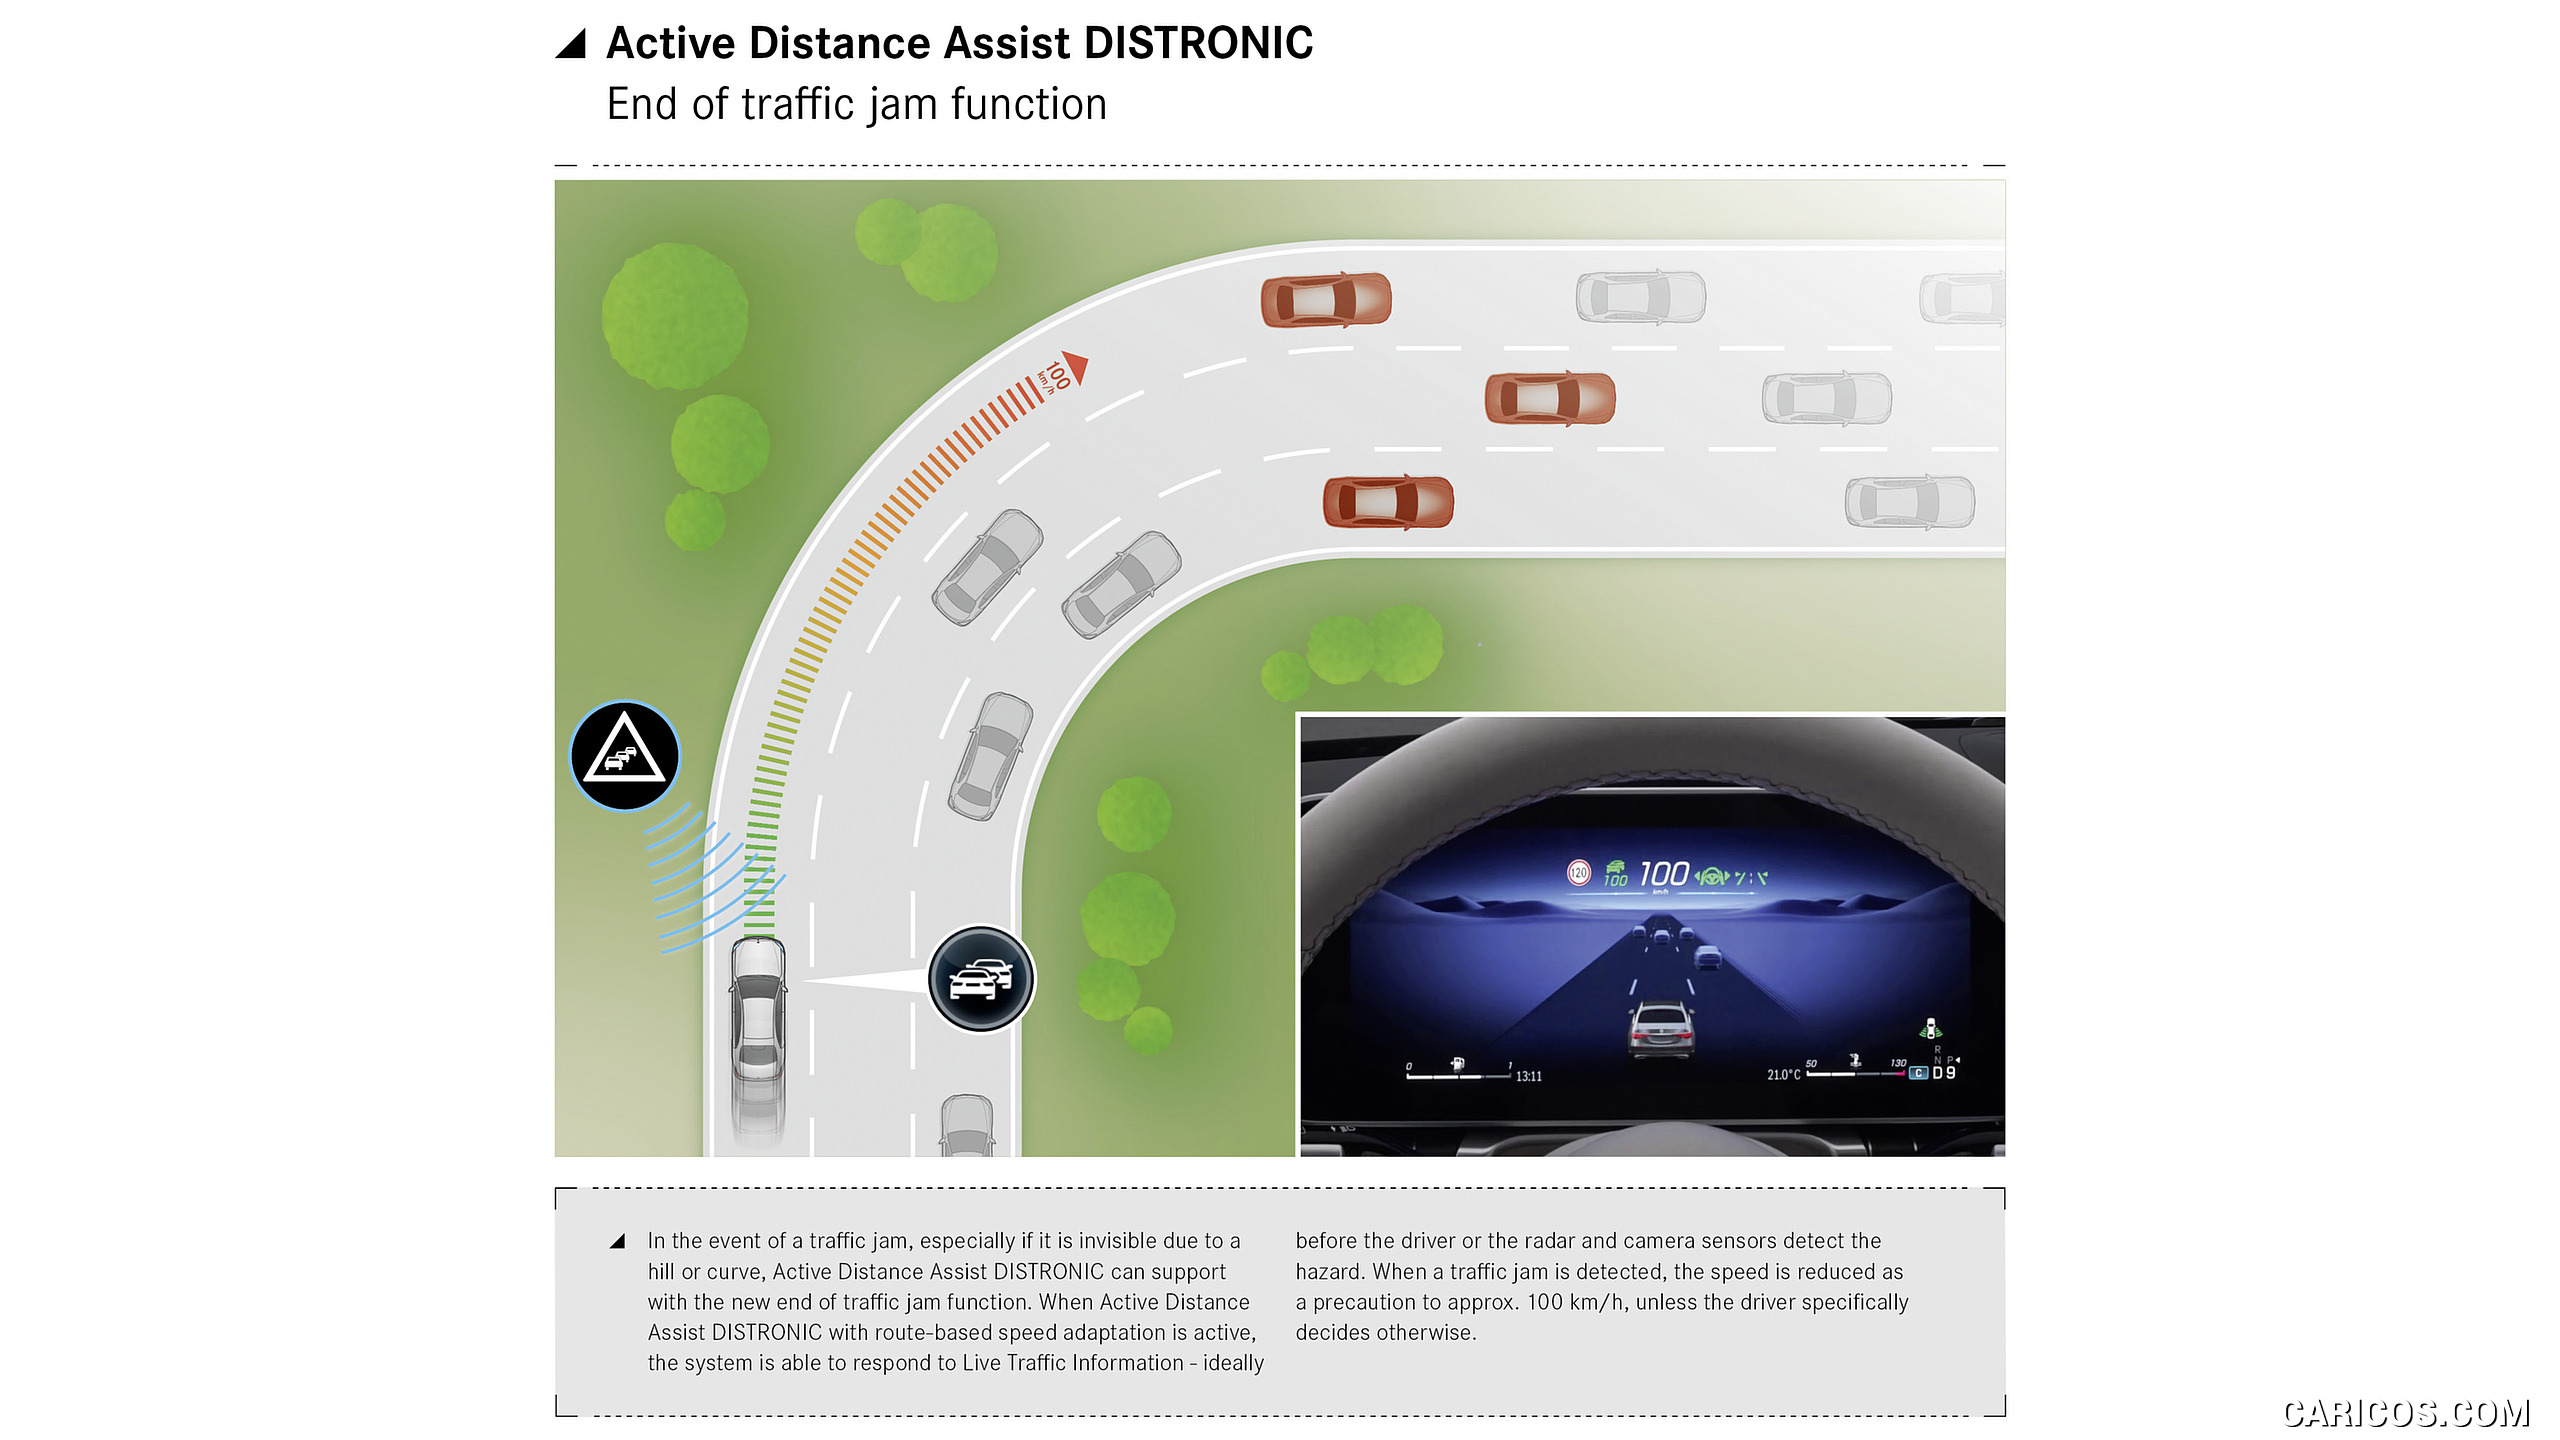 2021 Mercedes-Benz S-Class - Driving assistance system: Active Distance Assist DISTRONIC, #204 of 316